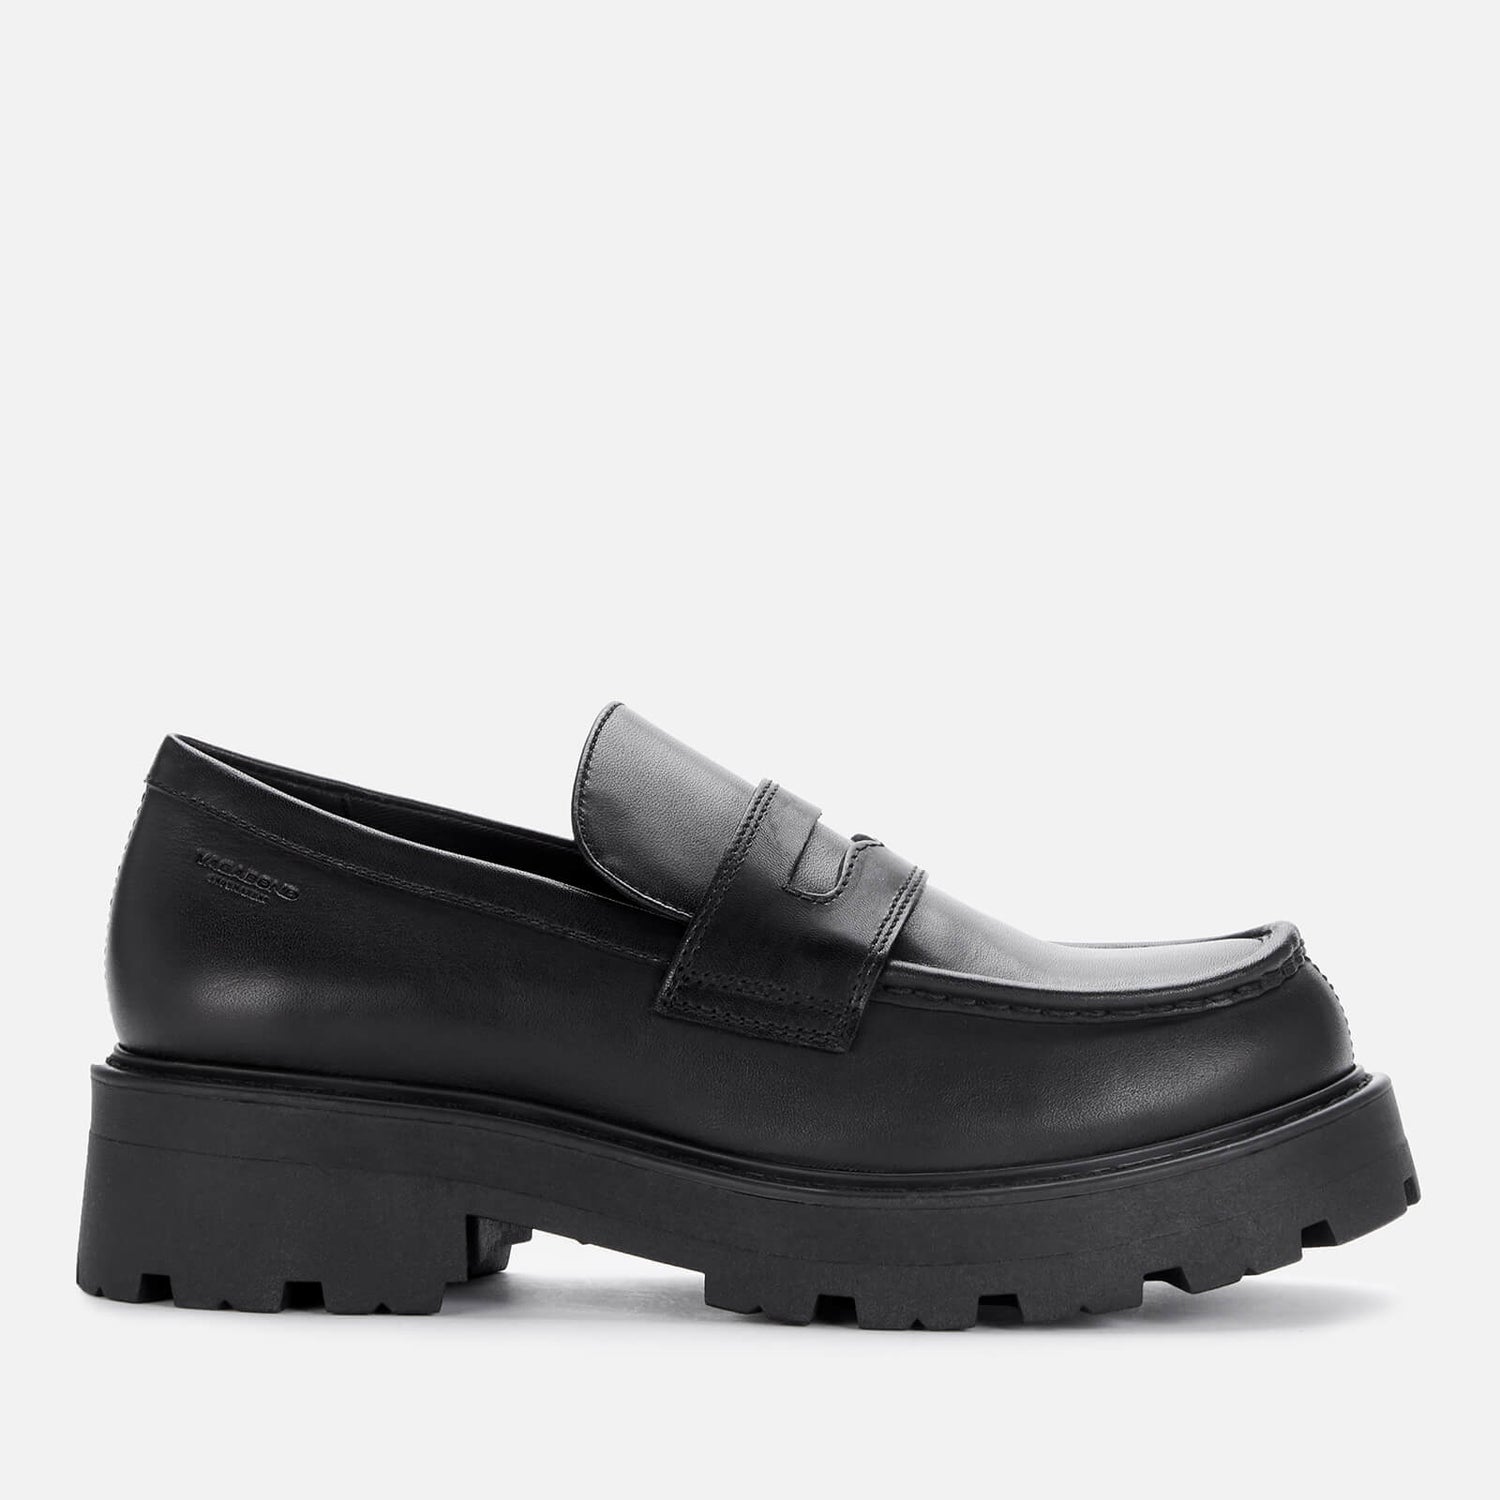 Vagabond Women's Cosmo 2.0 Leather Loafers - Black